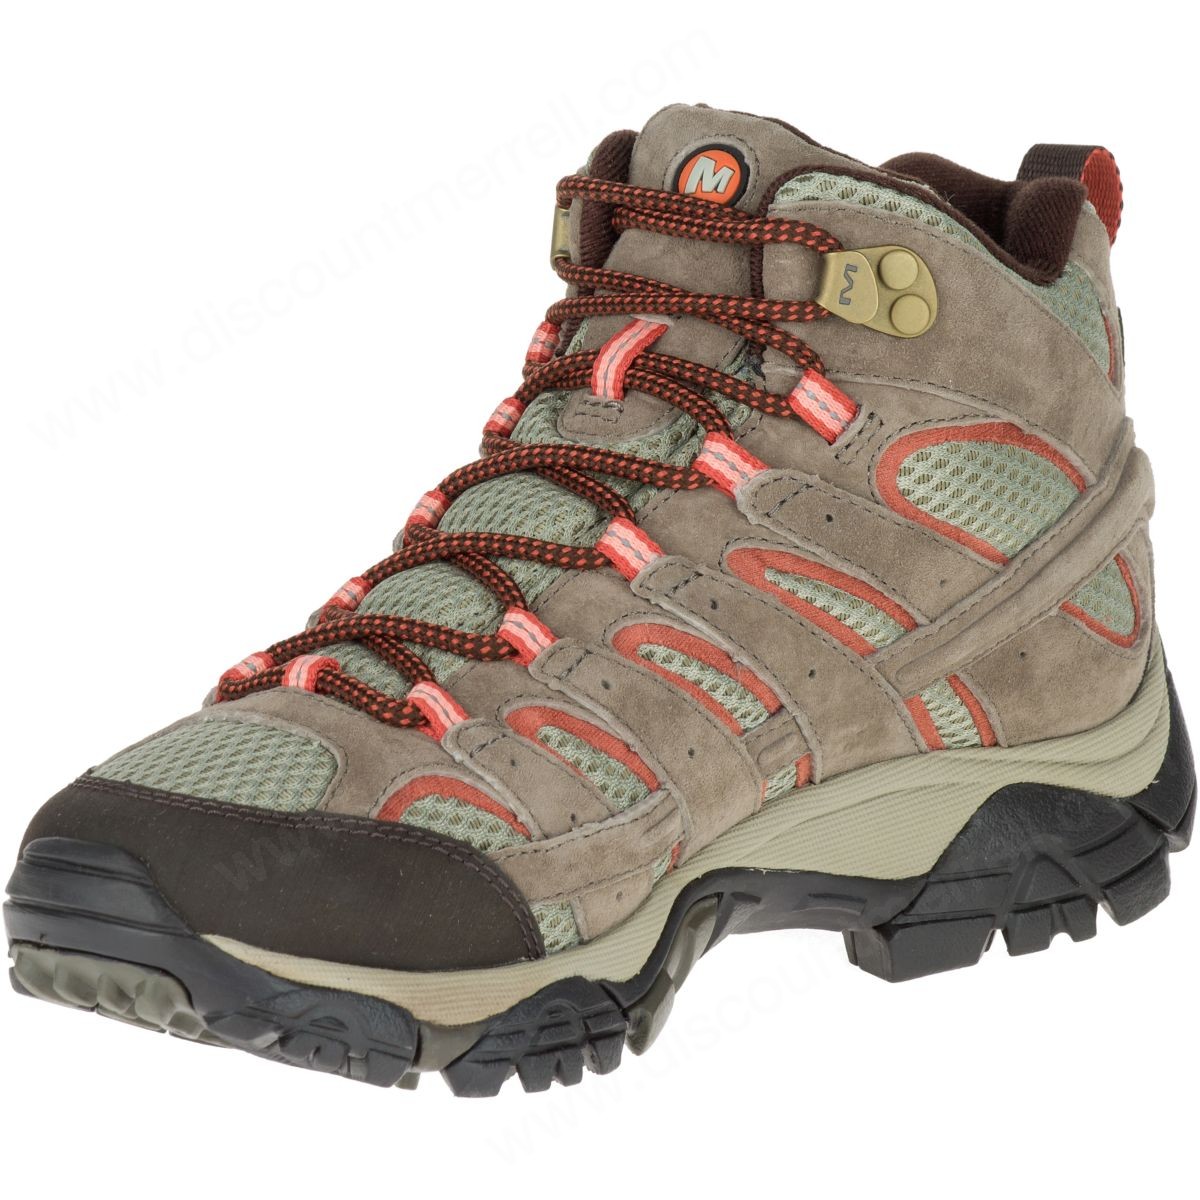 Merrell Lady's Moab Mother Of All Boots™ Mid Waterproof Wide Width Bungee Cord - -5